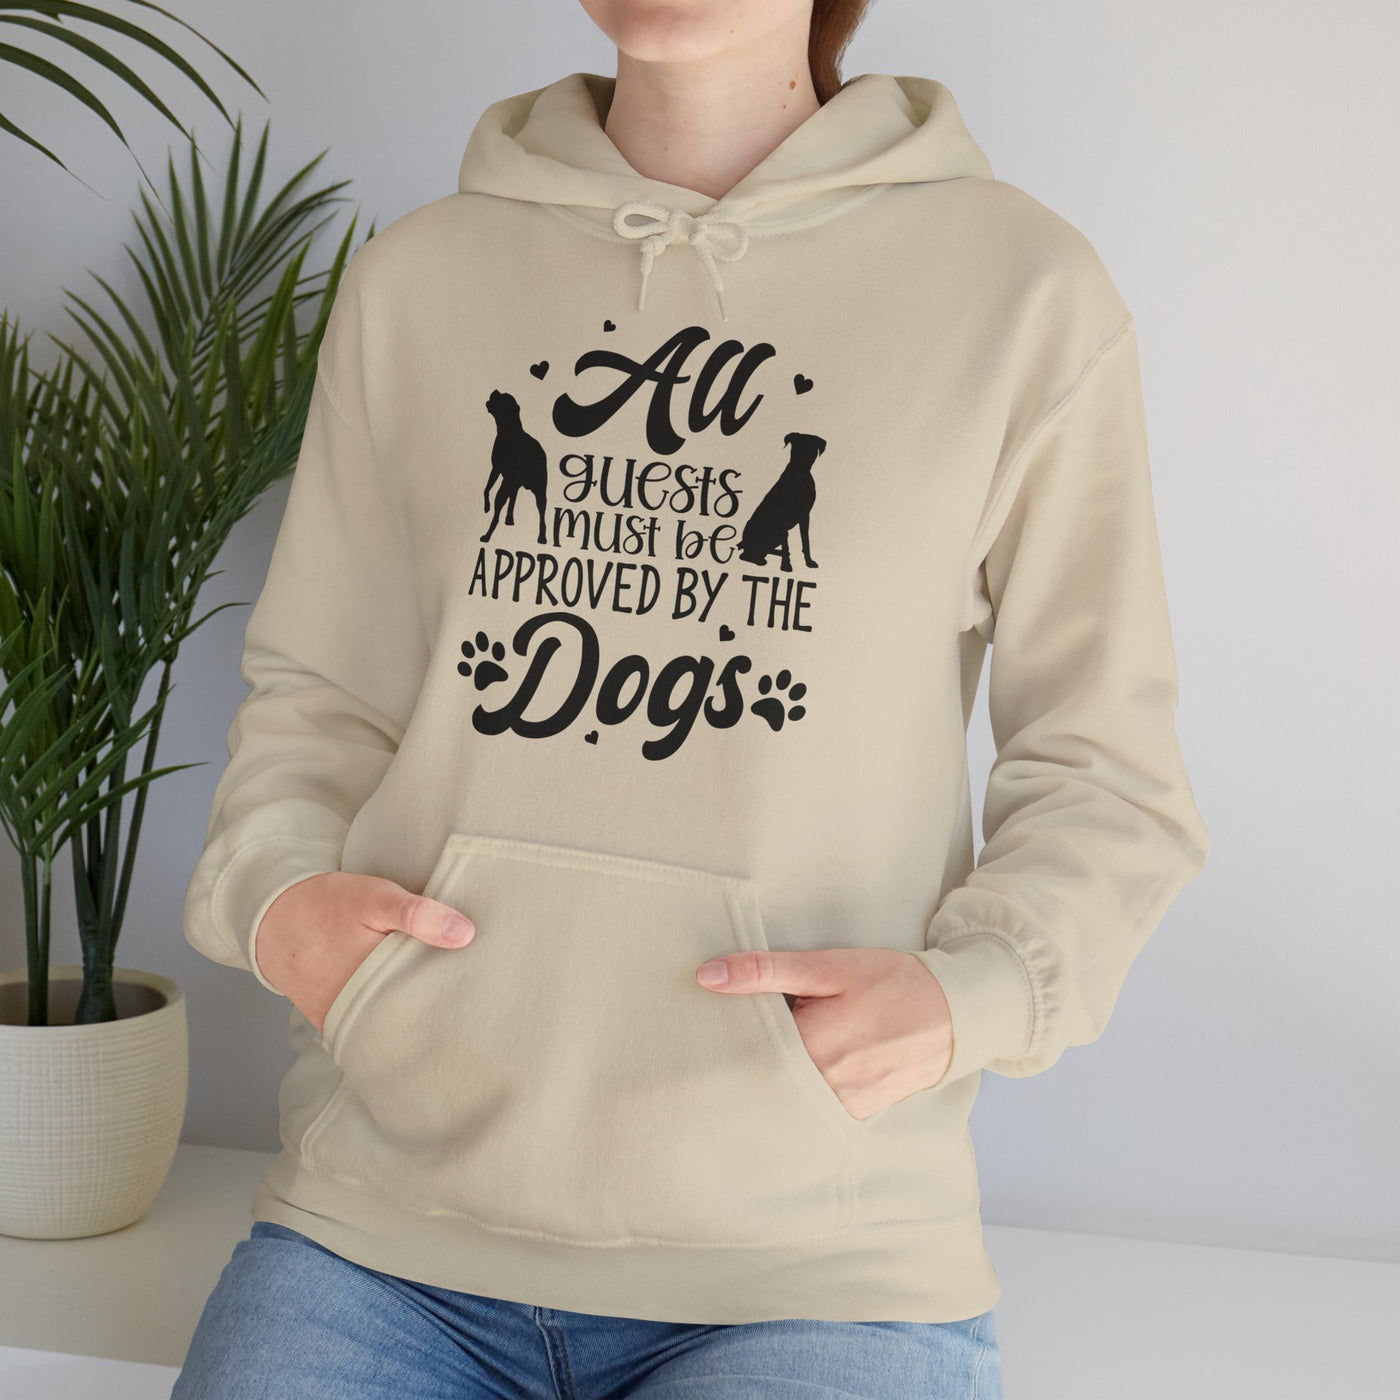 All Guests Must Be Approved By The Dogs Hoodies